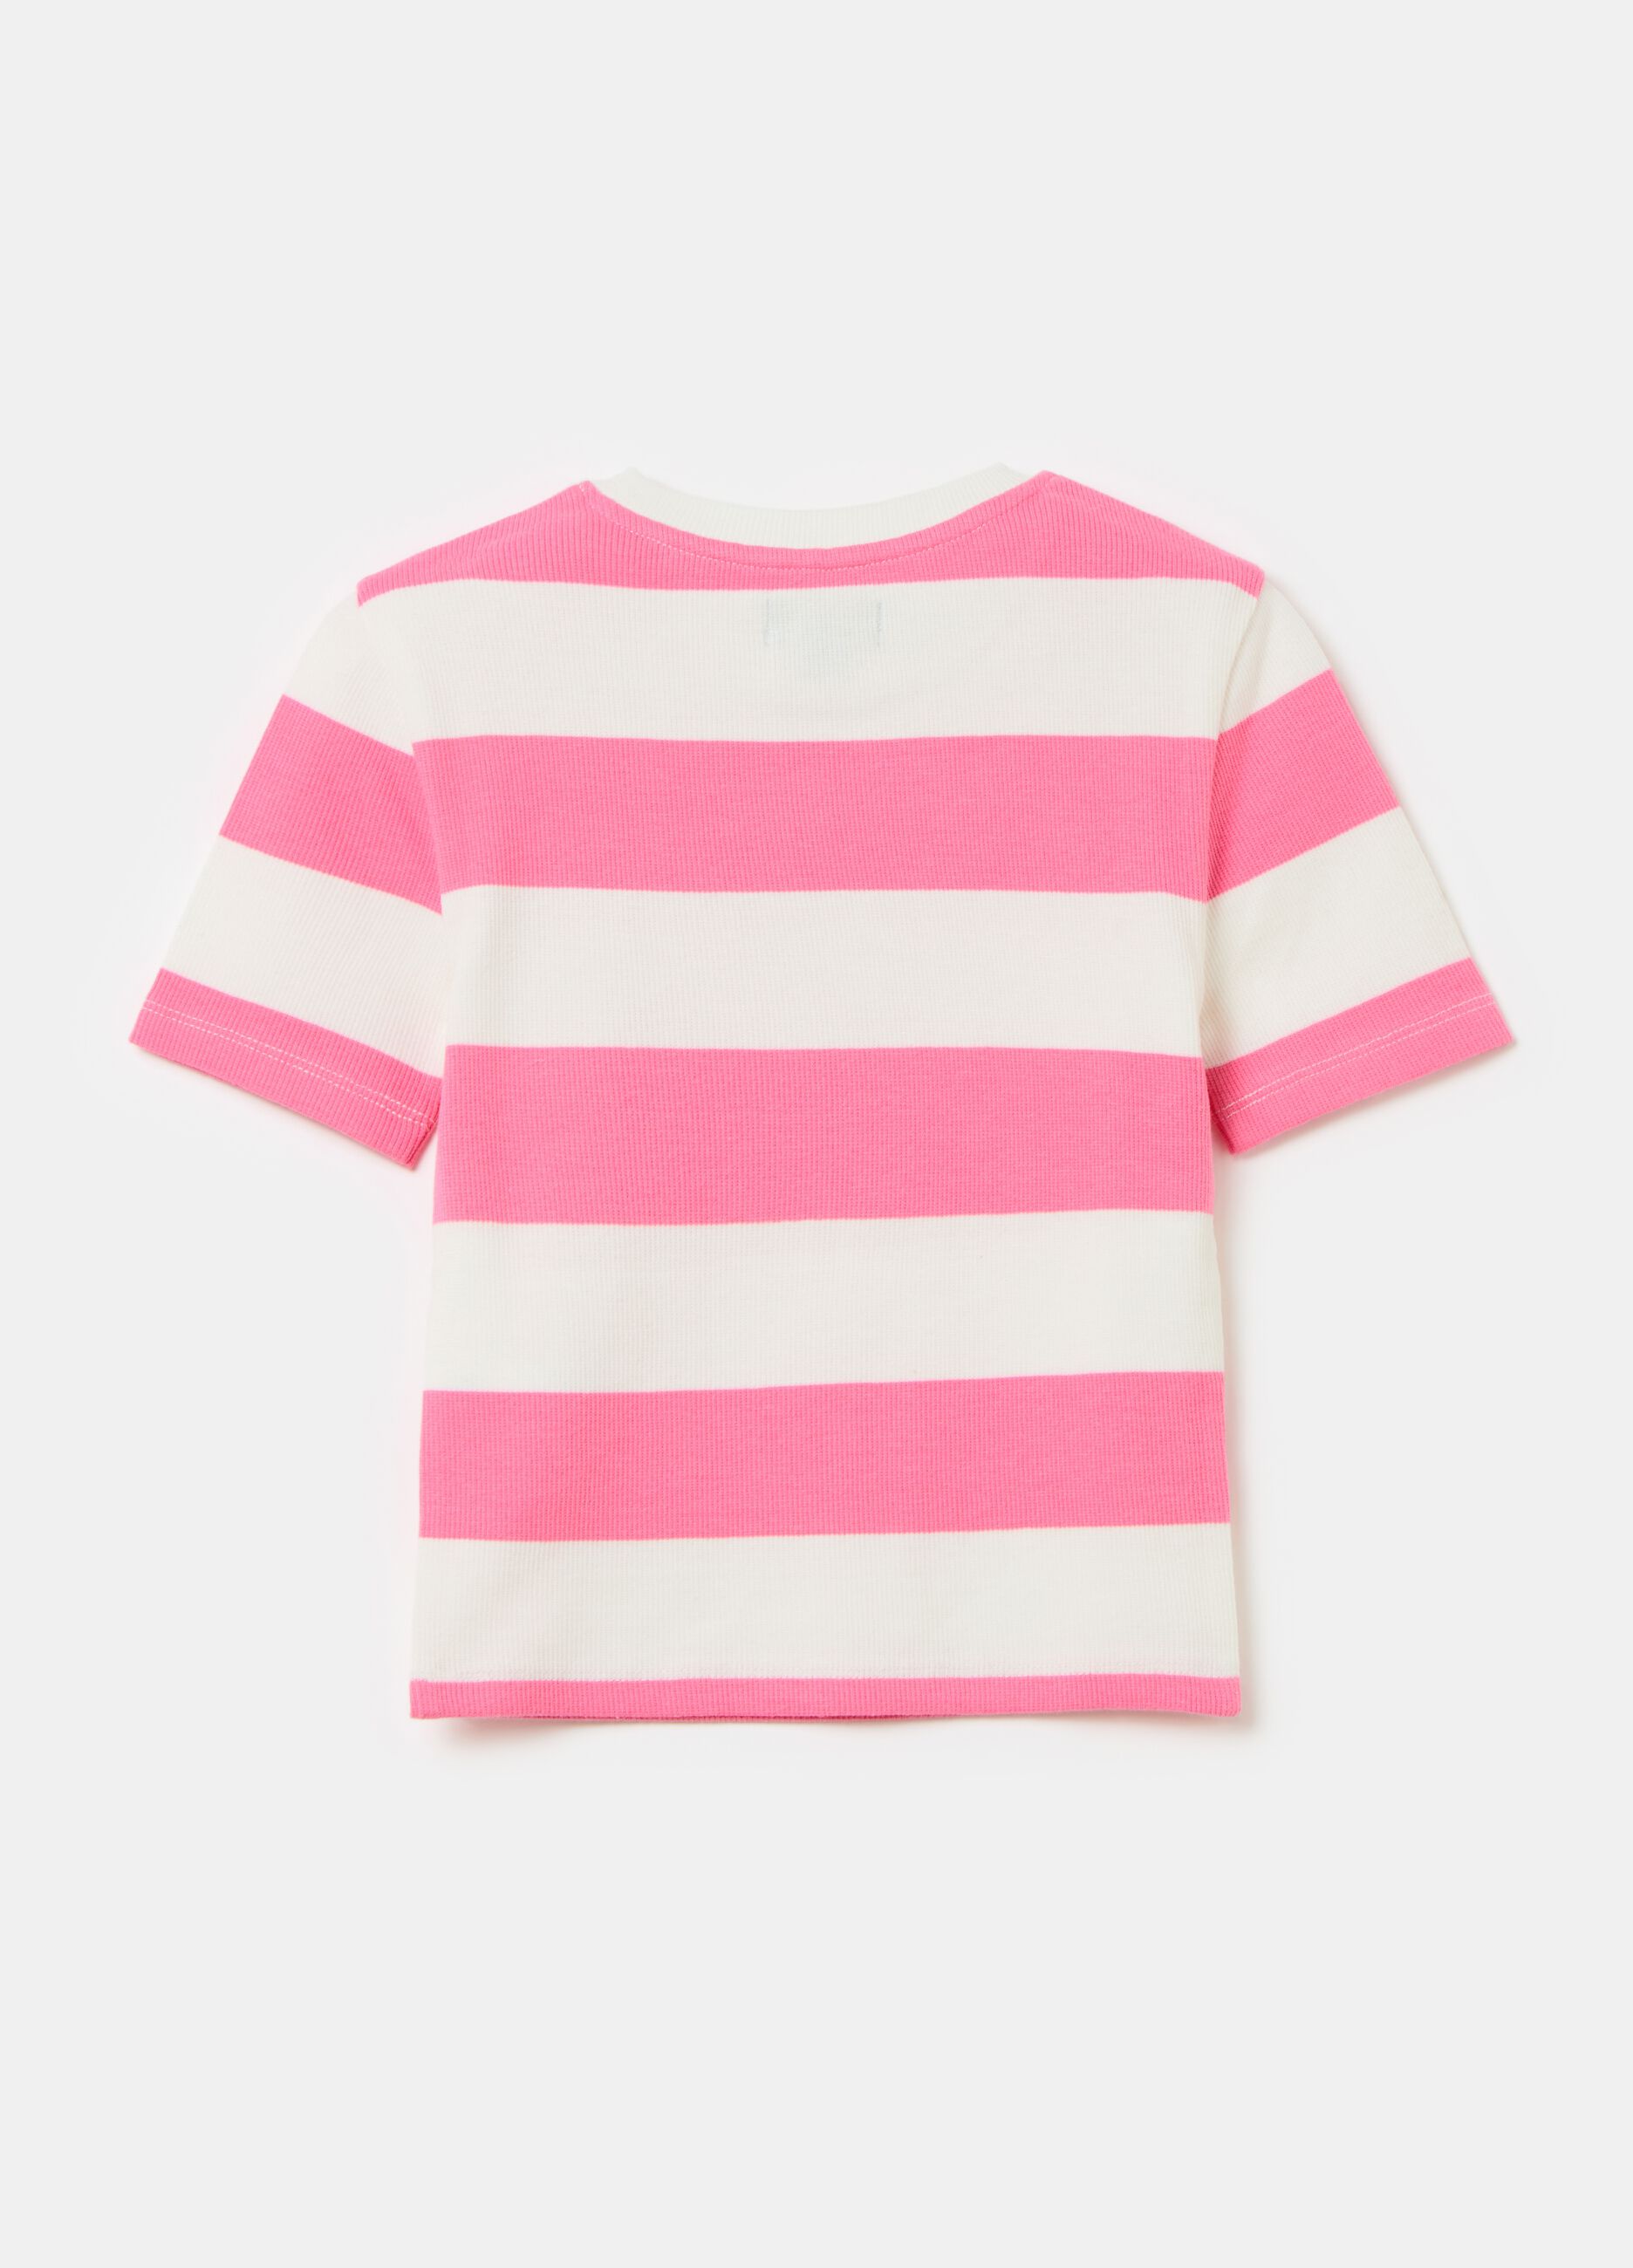 Slim ribbed T-shirt with striped pattern